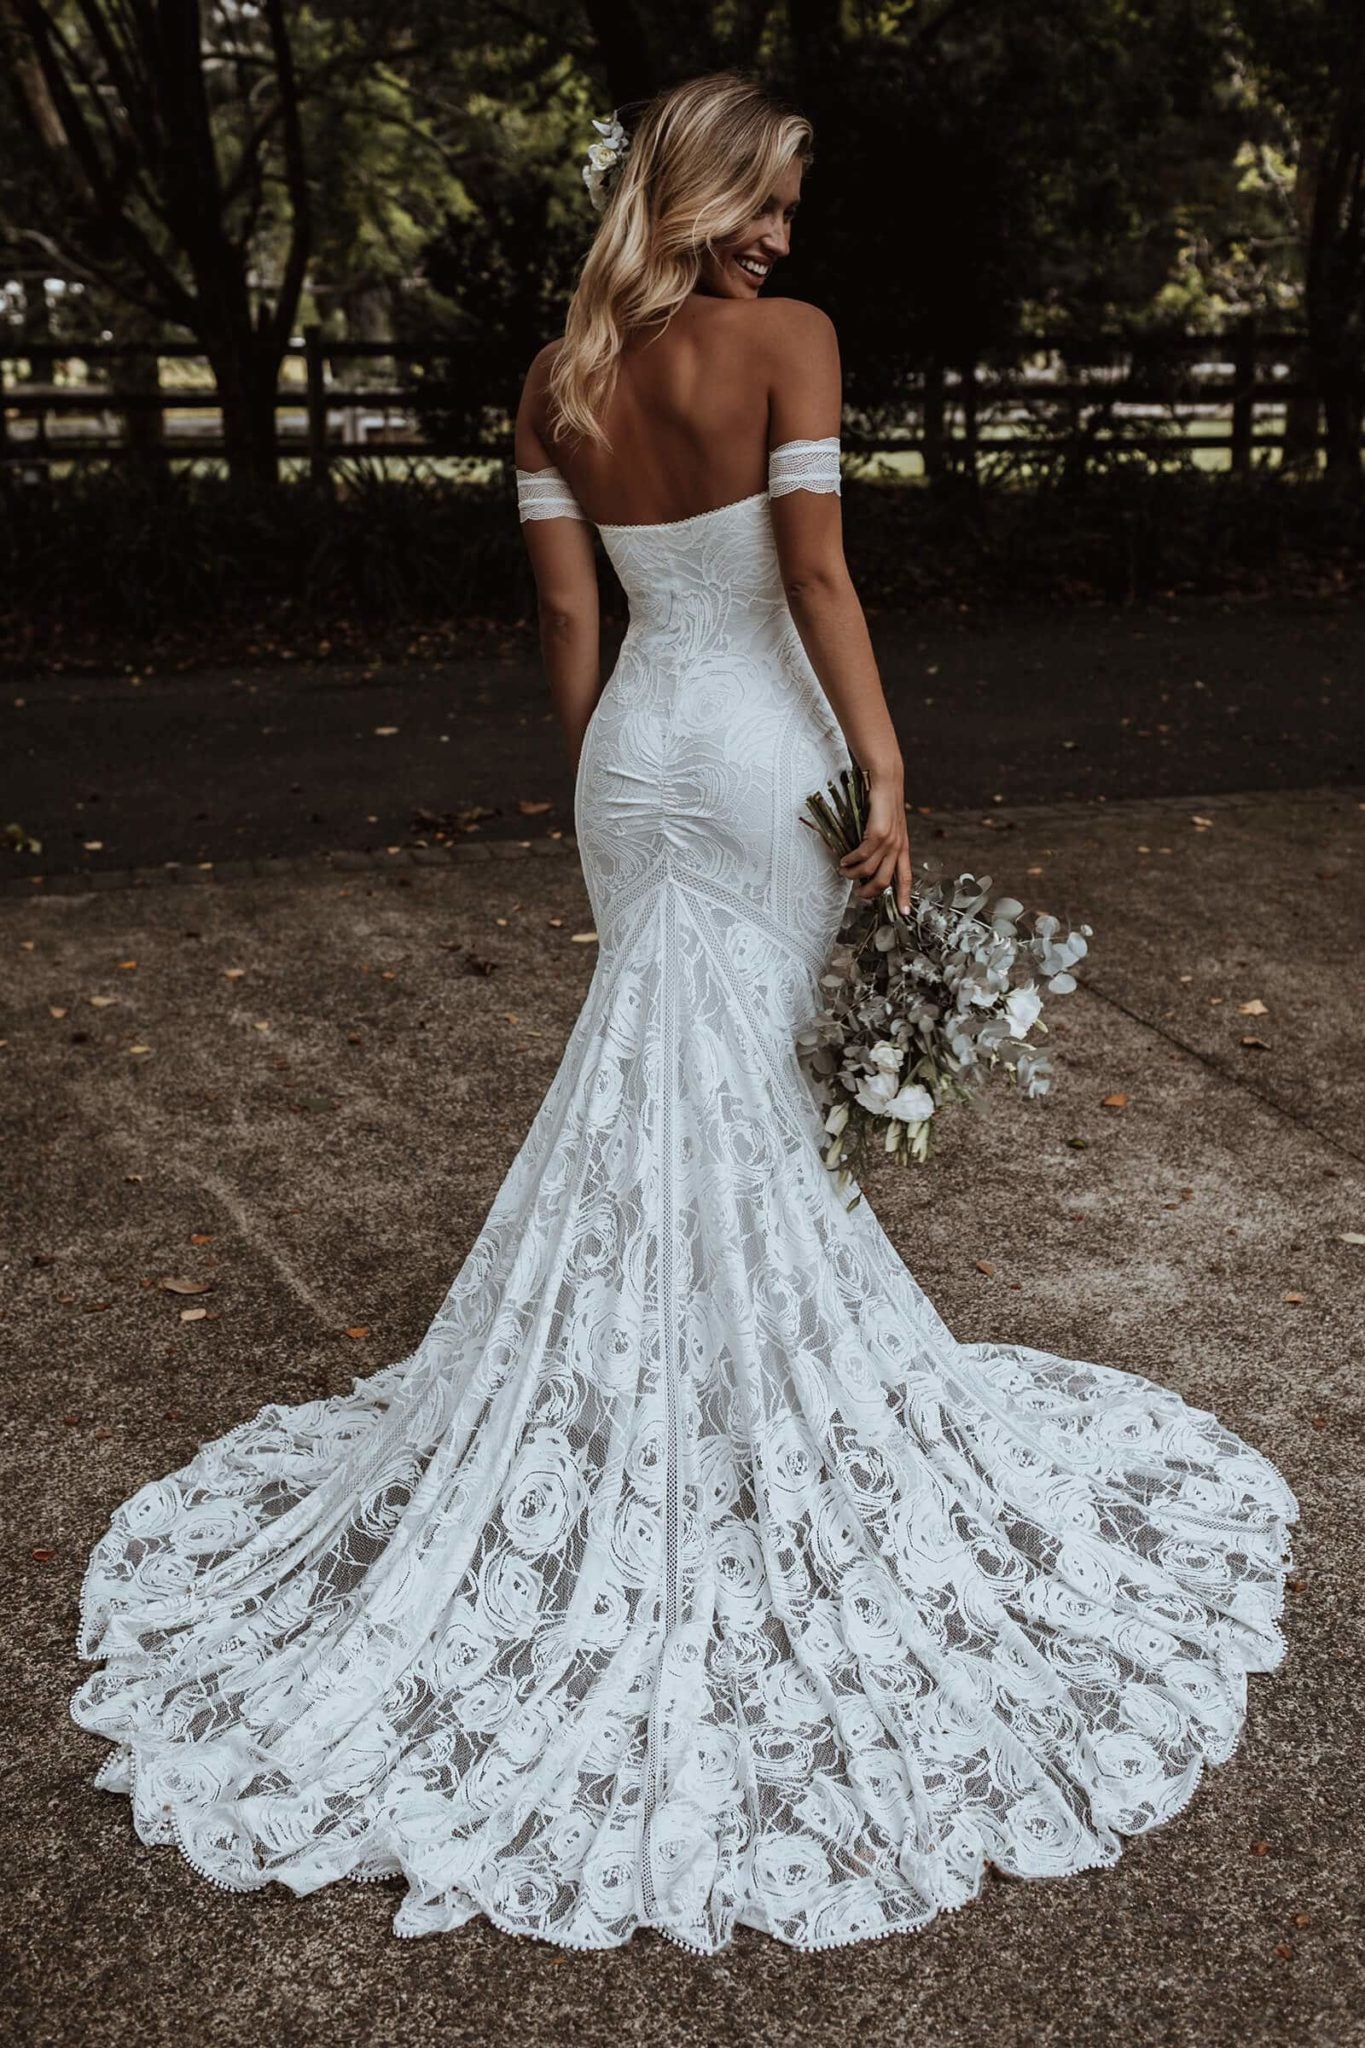 Where to Find Cheap Lace Wedding Dresses